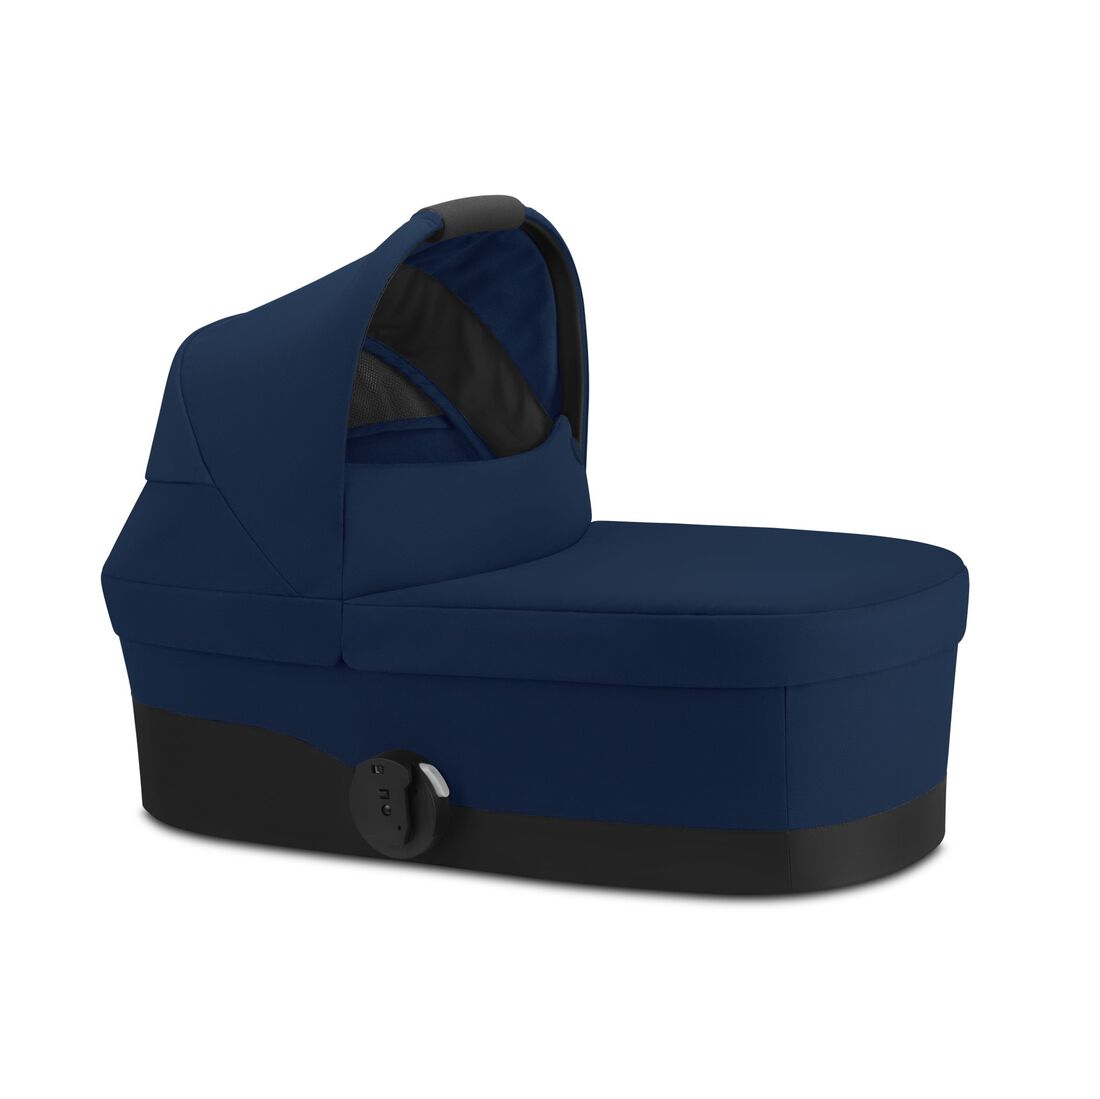 CYBEX Cot S - Navy Blue in Navy Blue large image number 1